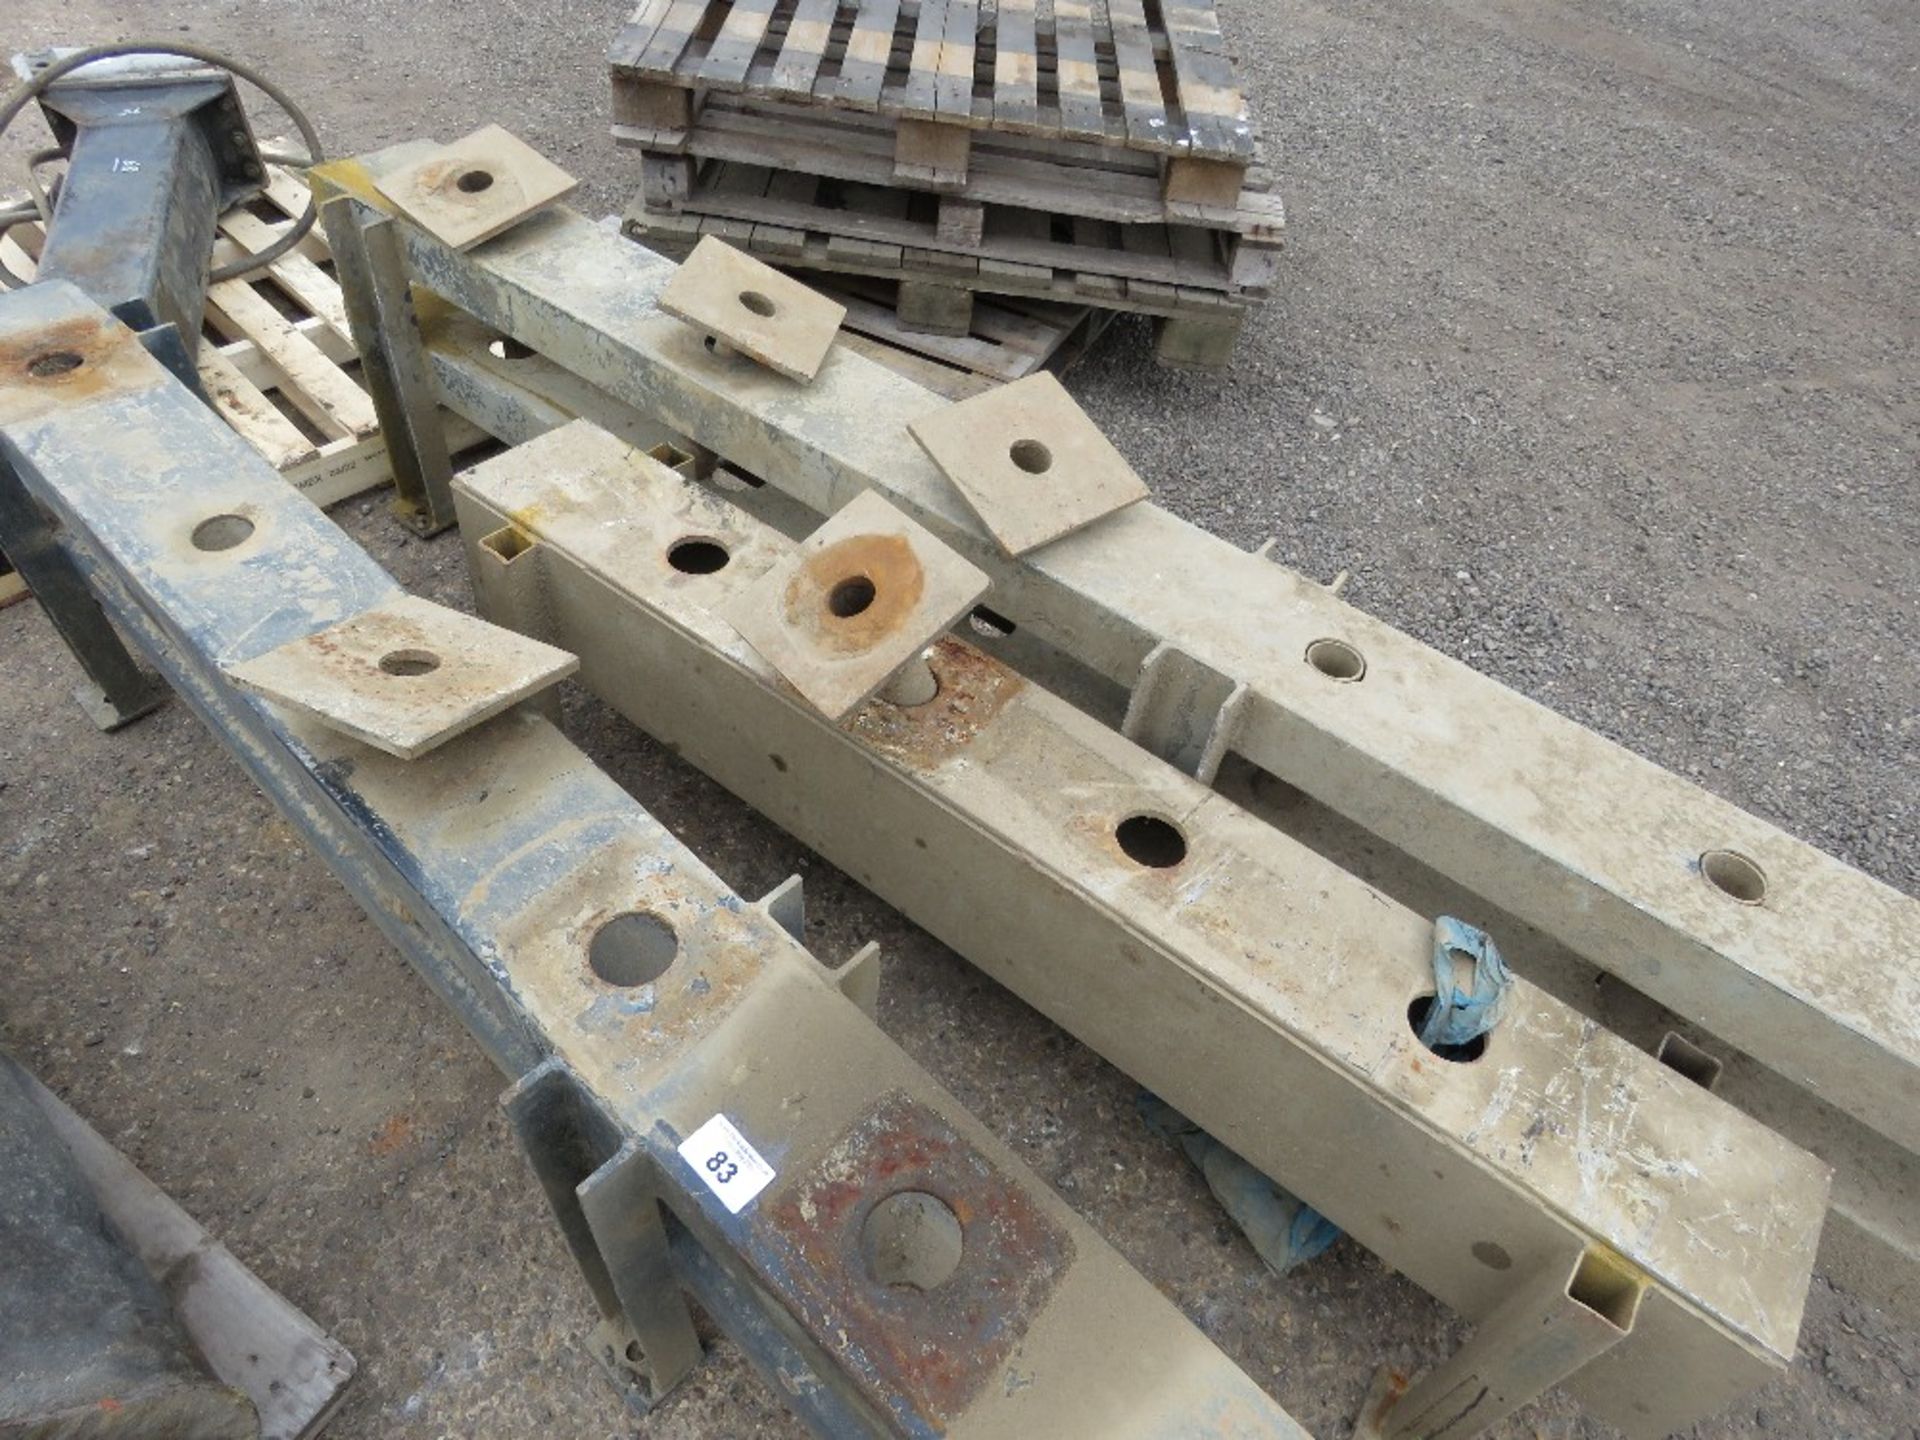 3 X HYDRAULIC EXCAVATOR BREAKER STAND UNITS . DIRECT FROM DEPOT CLOSURE. - Image 3 of 4